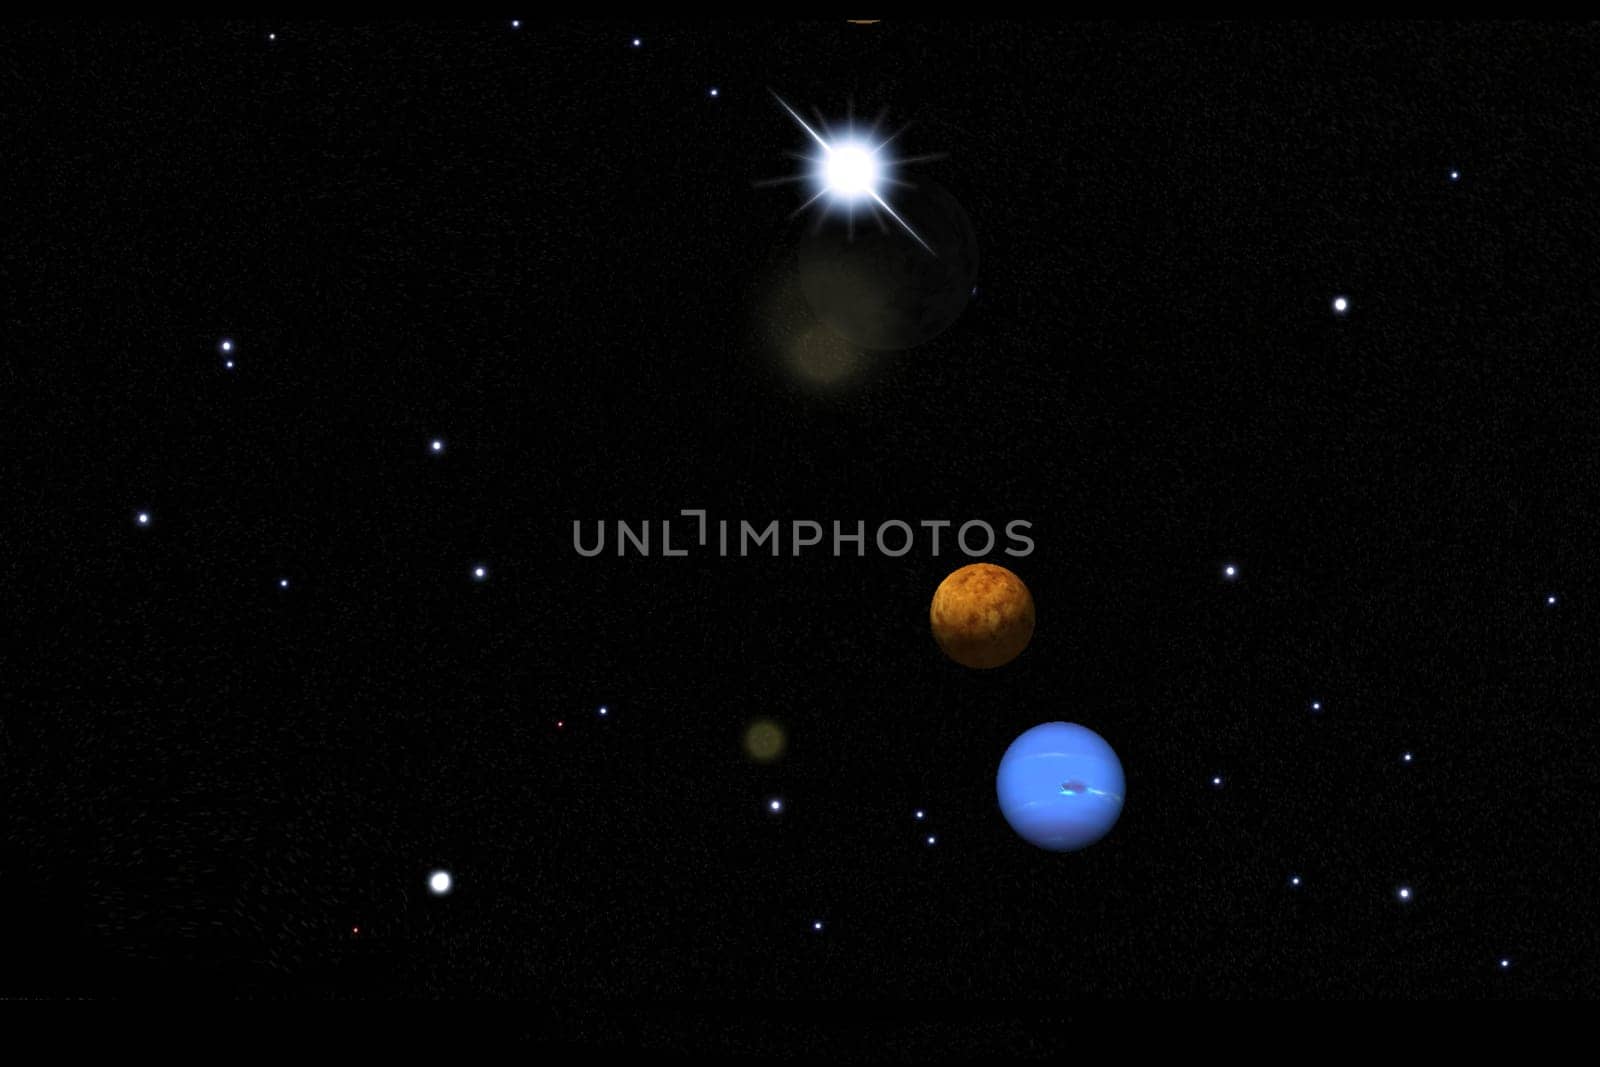 Planets of the solar system in space against the starry sky.Planets of the Solar System in the Universe. 3D rendering